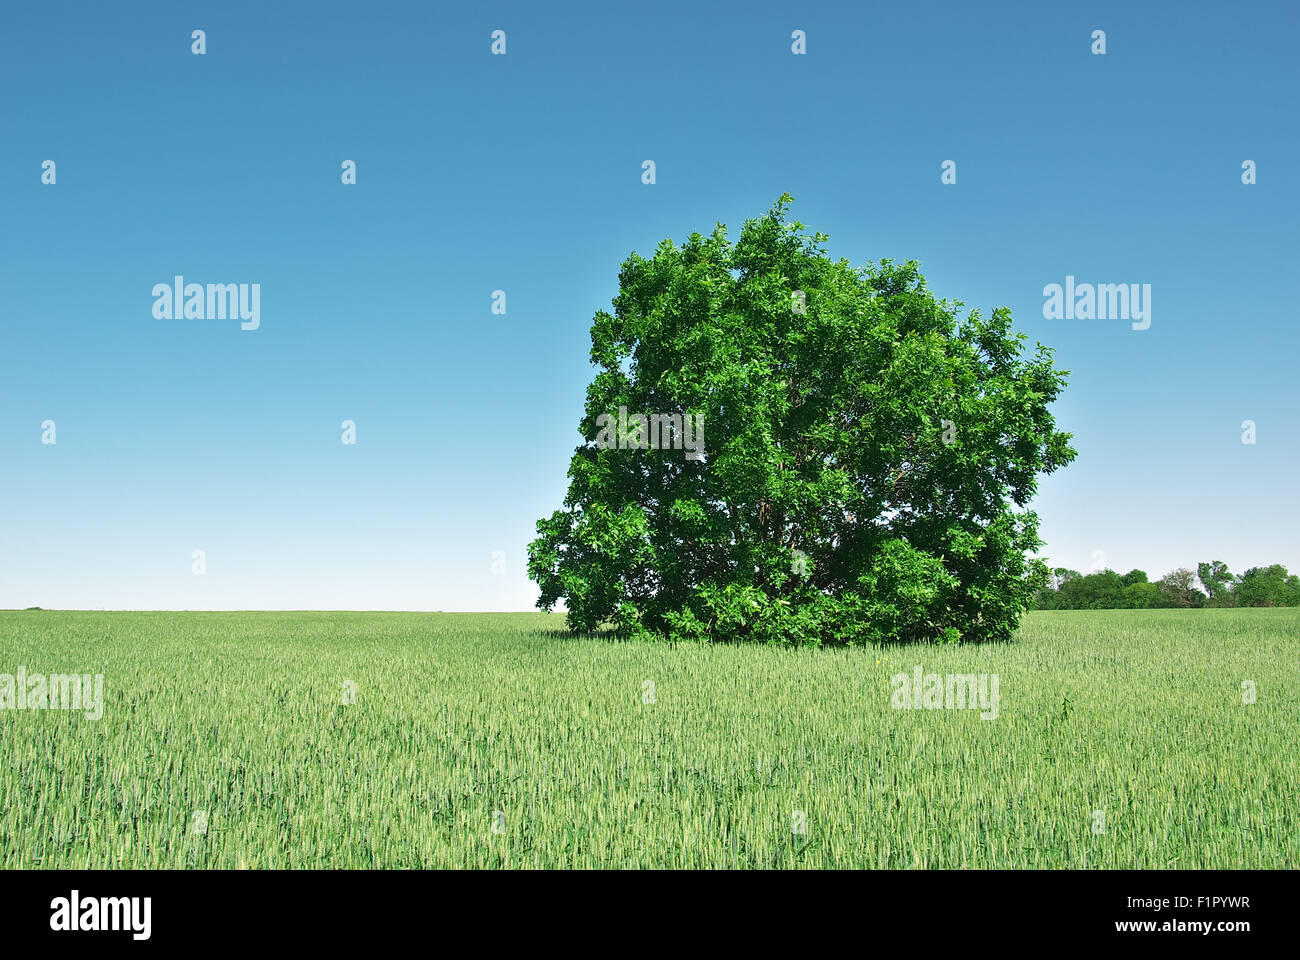 Lonely big green tree in a field of young wheat. Nature composition. Stock Photo